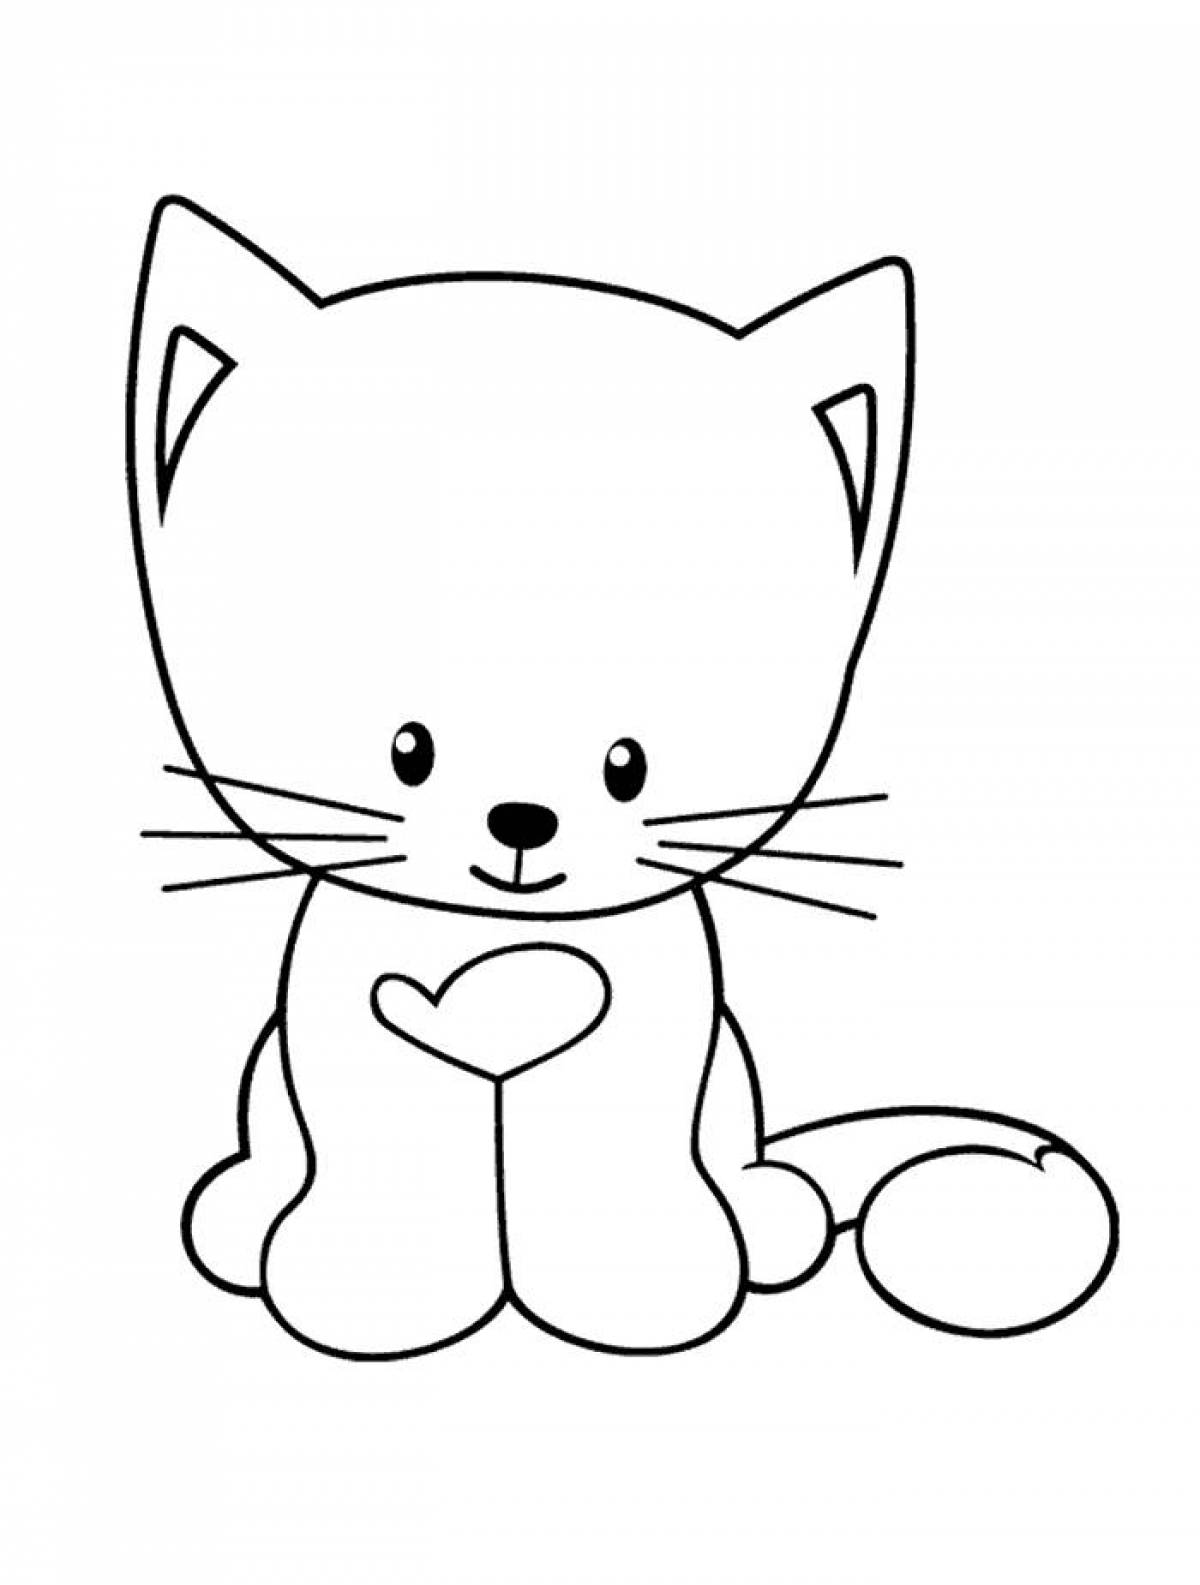 Fine cats coloring pages for kids